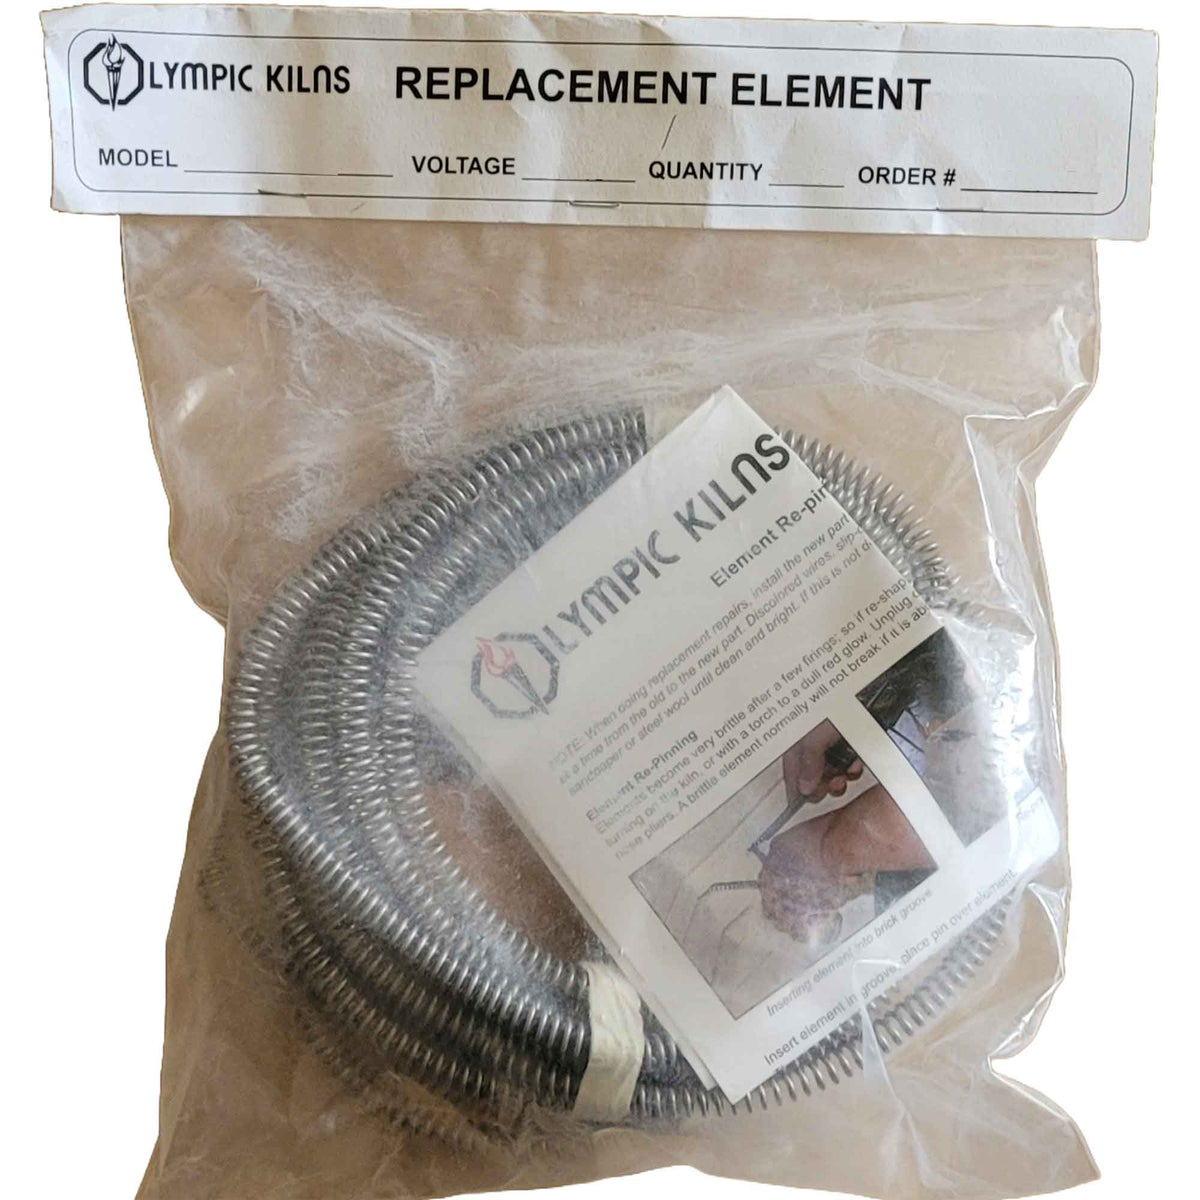 Olympic Kiln Replacement Element for Model 2827 or 2827H - 48 Amp Models